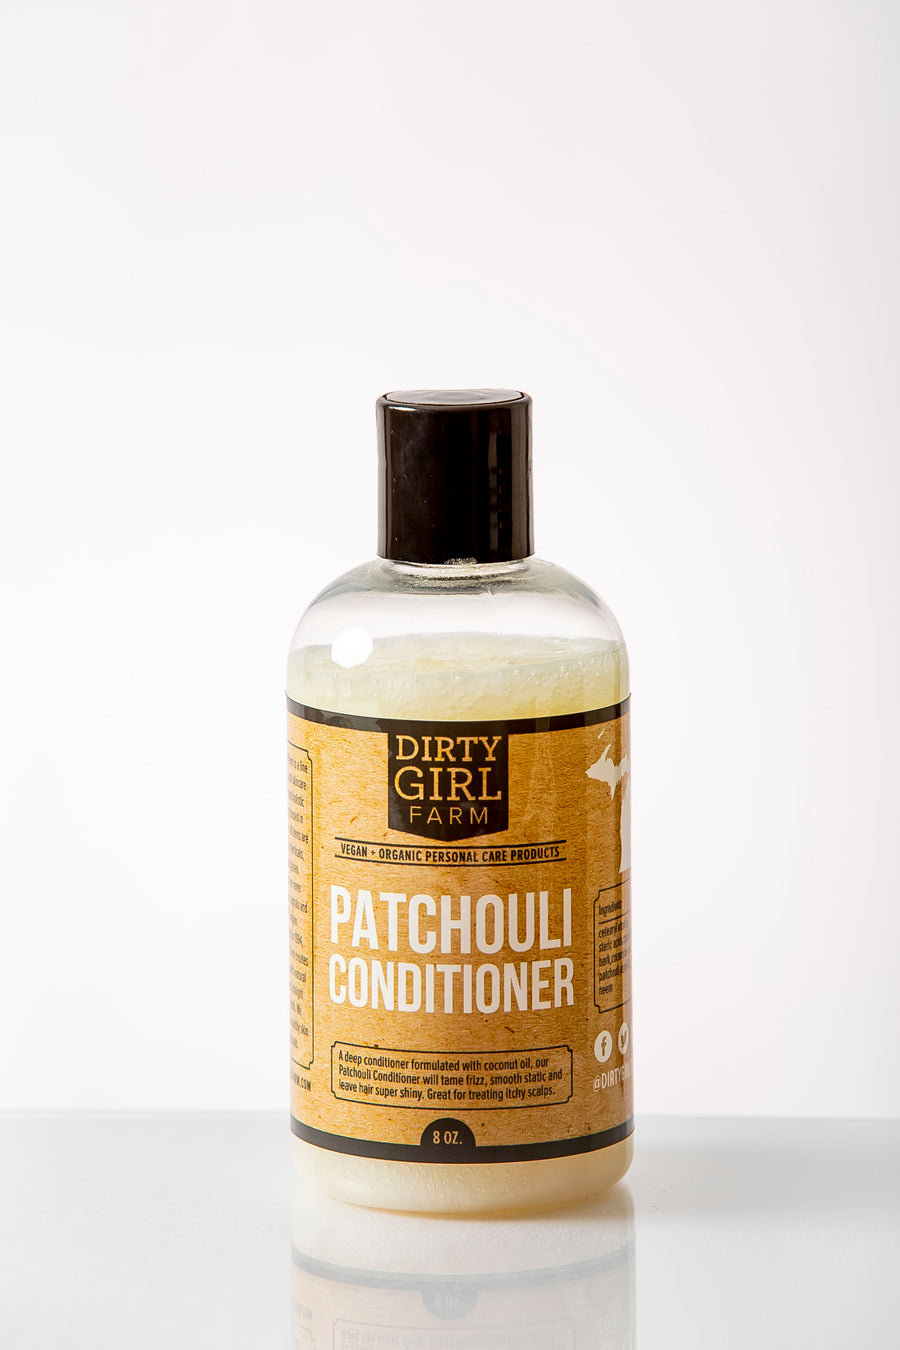 Dirty Girl Farm Patchouli Conditioner